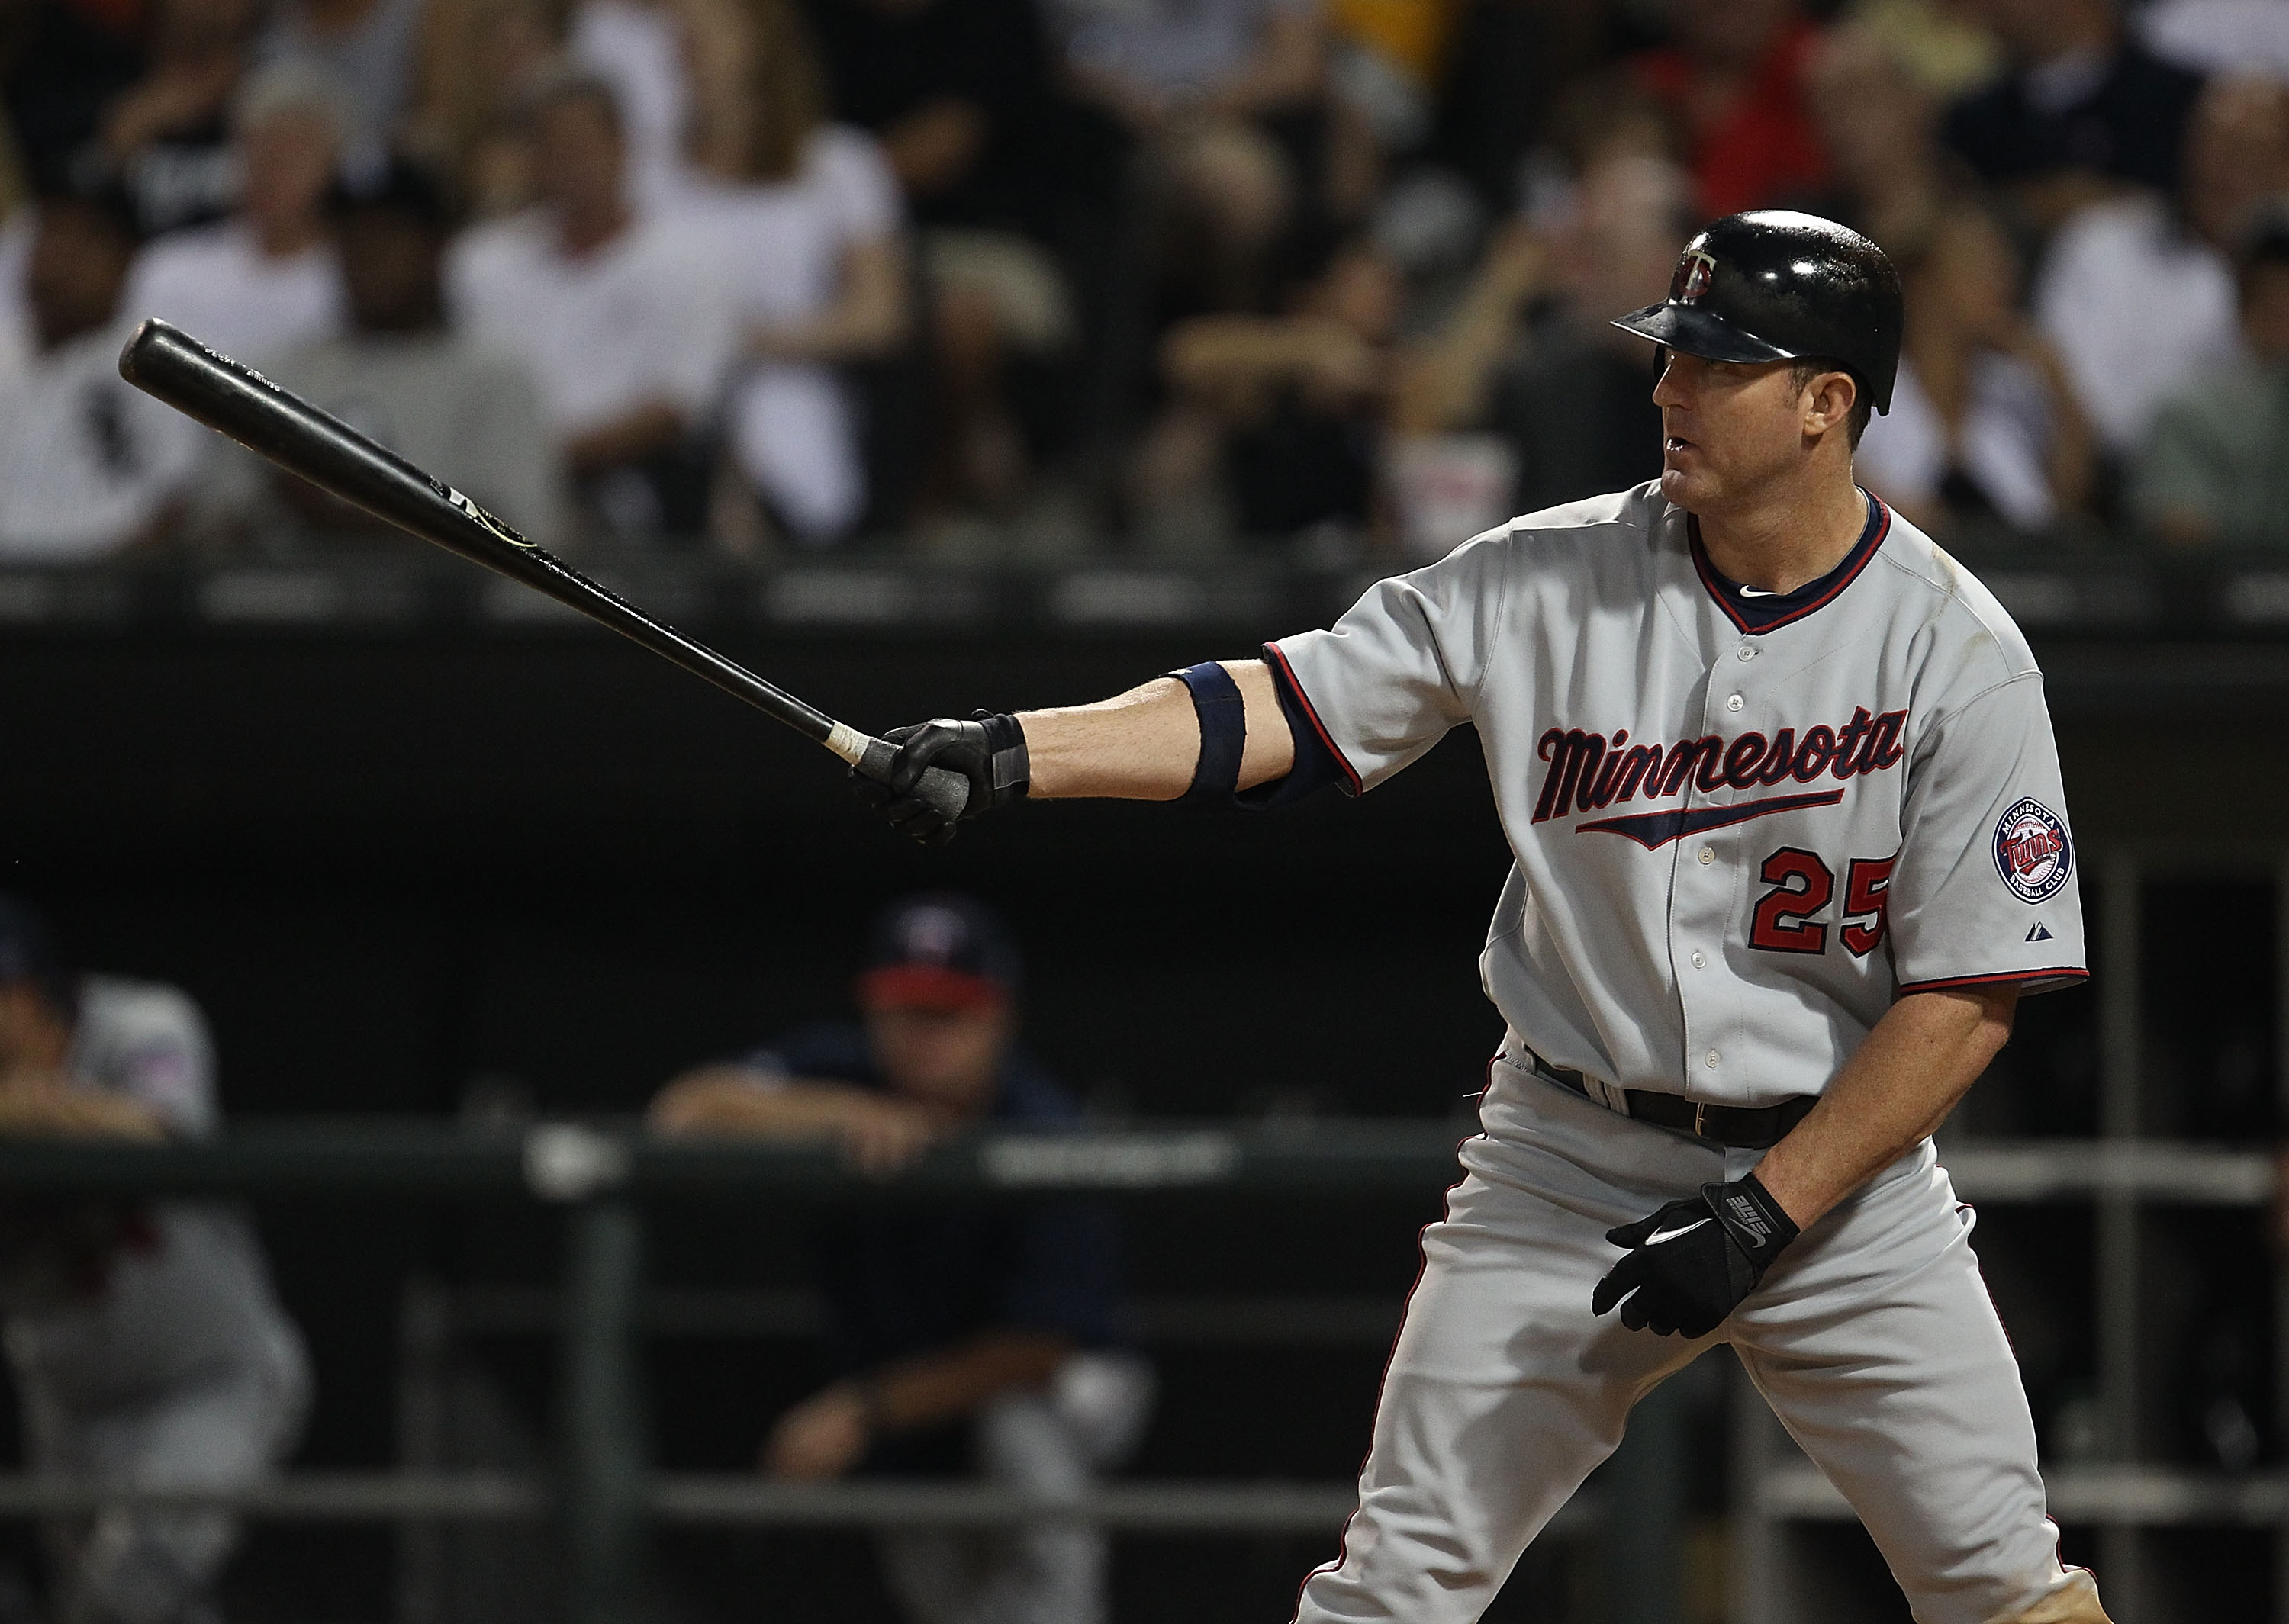 CHICAGO - AUGUST 10: Jim Thome #25 of the Minnesota Twins prepares to bat against the Chicago White Sox at U.S. Cellular Field on August 10, 2010 in Chicago, Illinois. The Twins defeated the White Sox 12-6. (Photo by Jonathan Daniel/Getty Images)